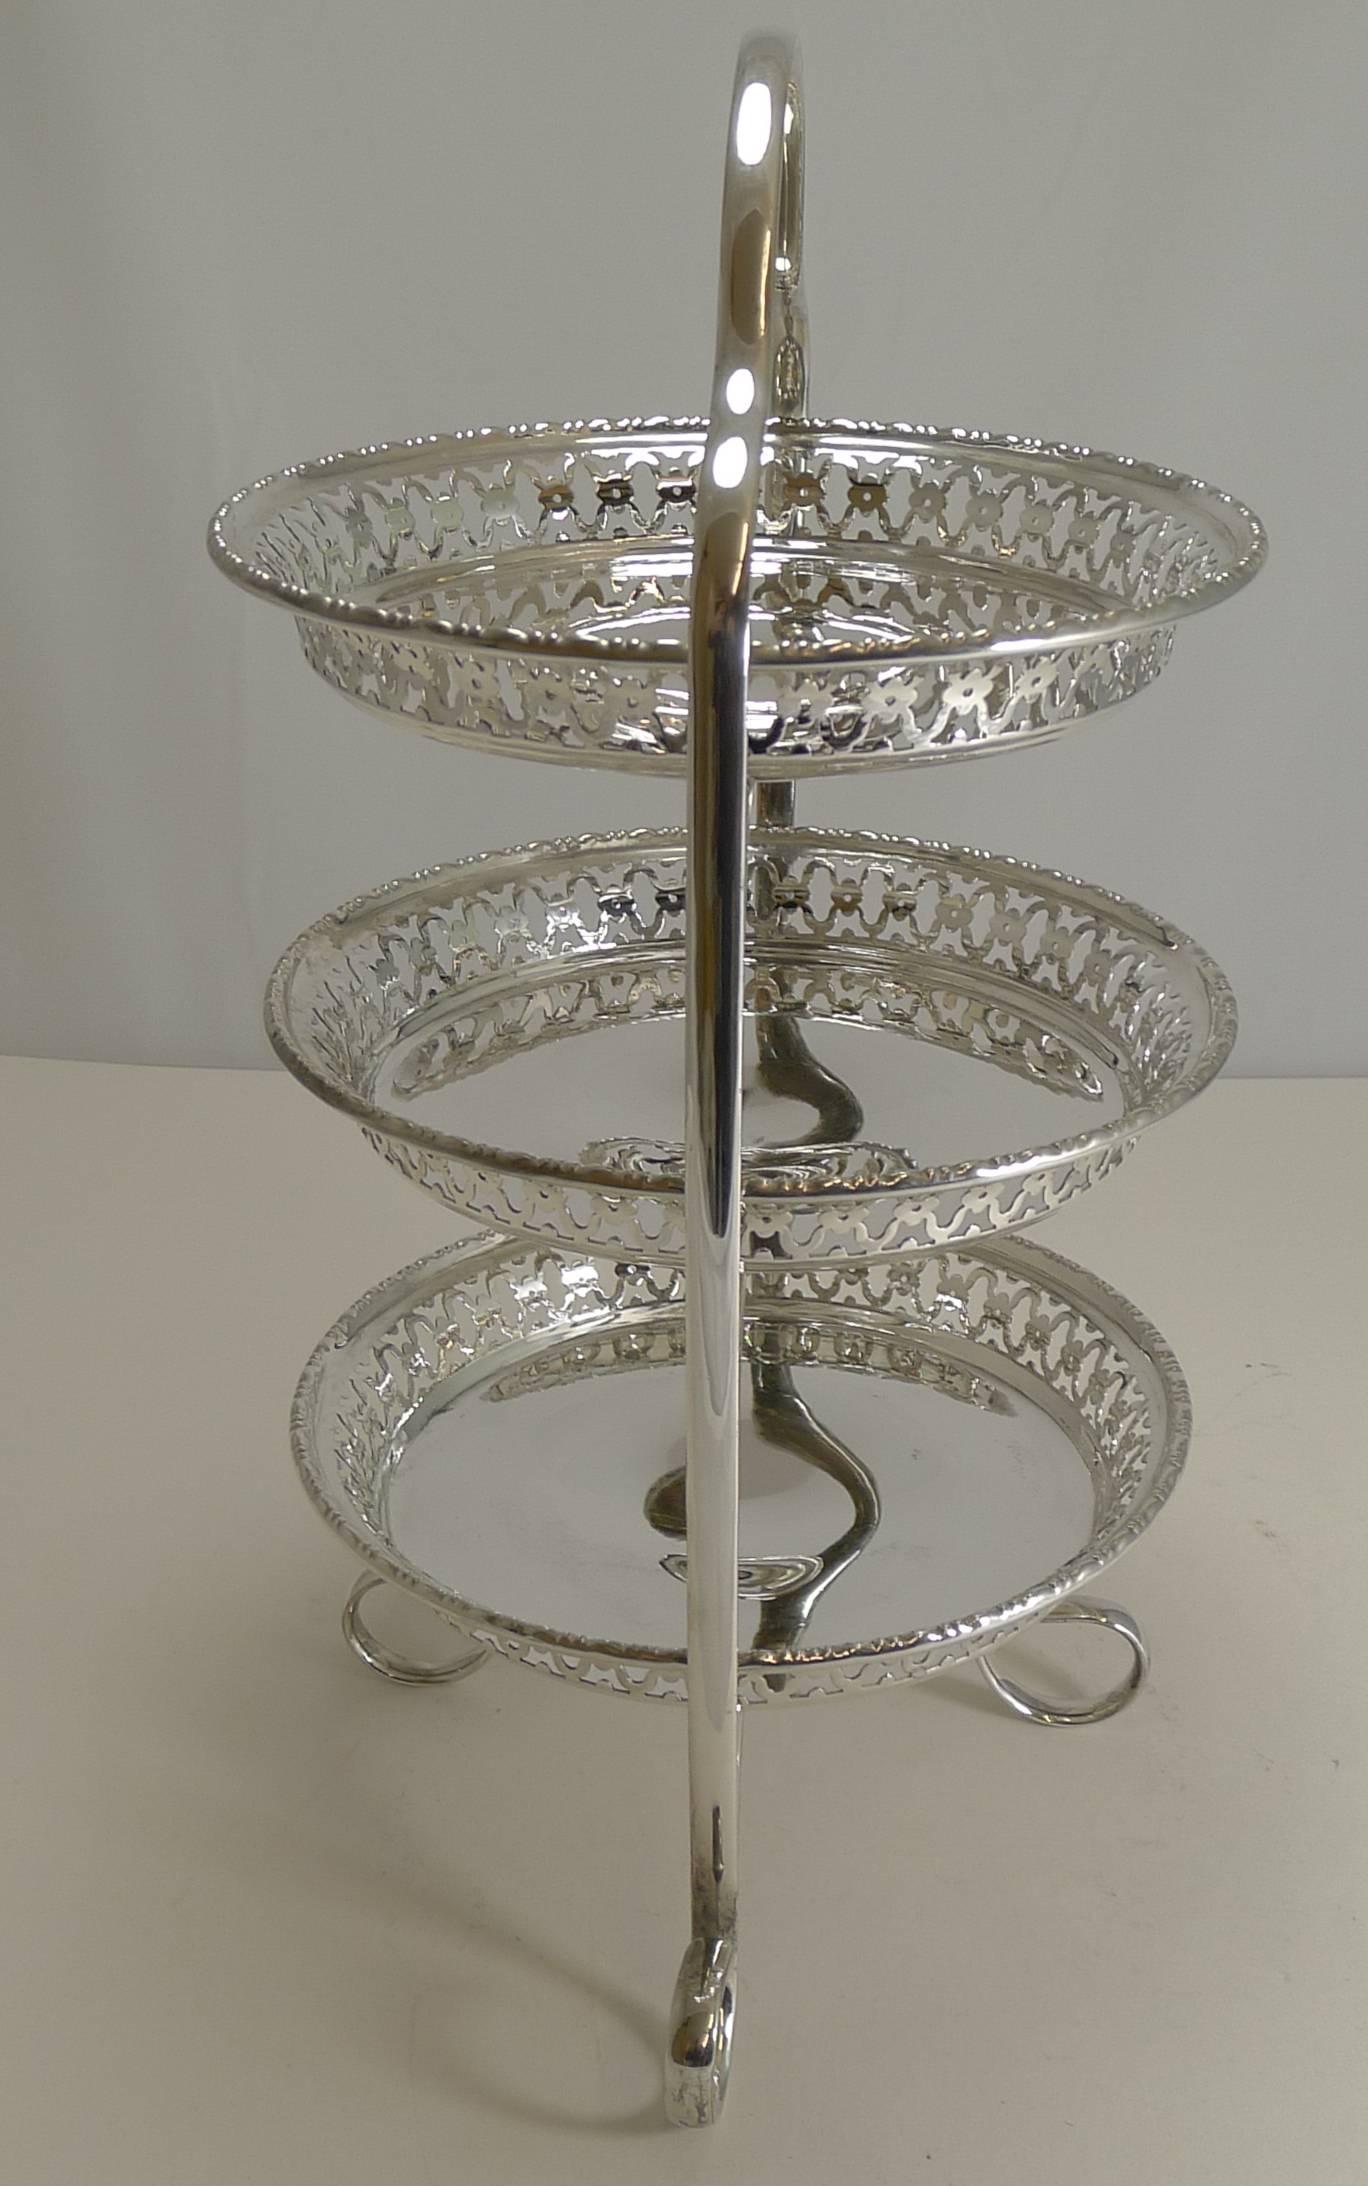 One of the most lovely cake stands I have had in some time, this three-tier example made from English silver plate. The three circular dishes are quite magnificent, each with a dimple in the centre and a wonderful pierced or reticulated